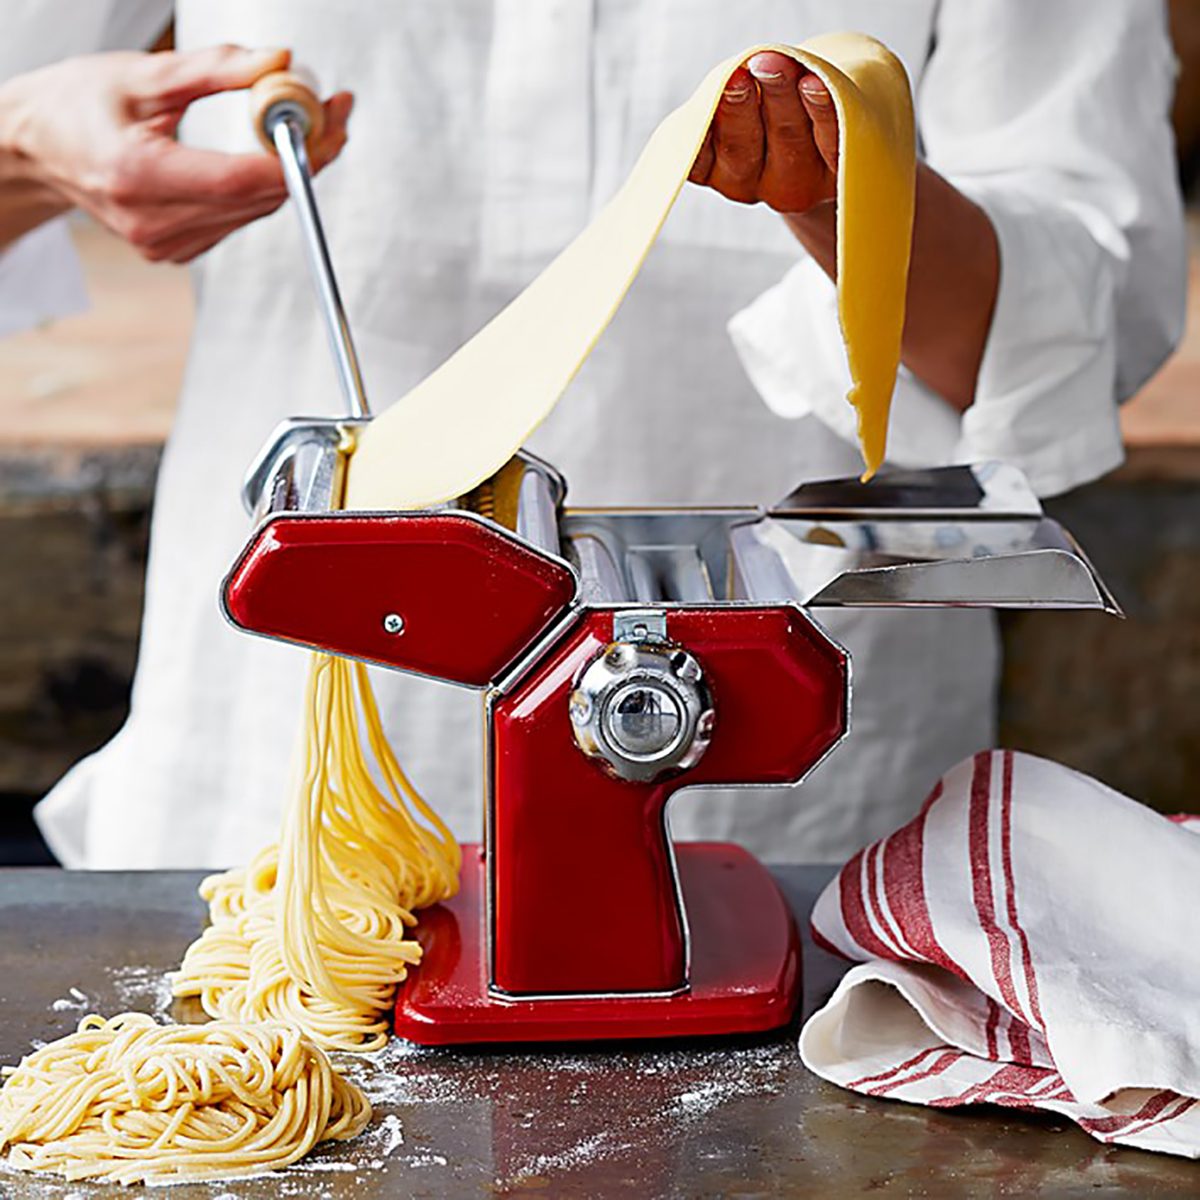 Best Gifts for Chefs, by Chefs